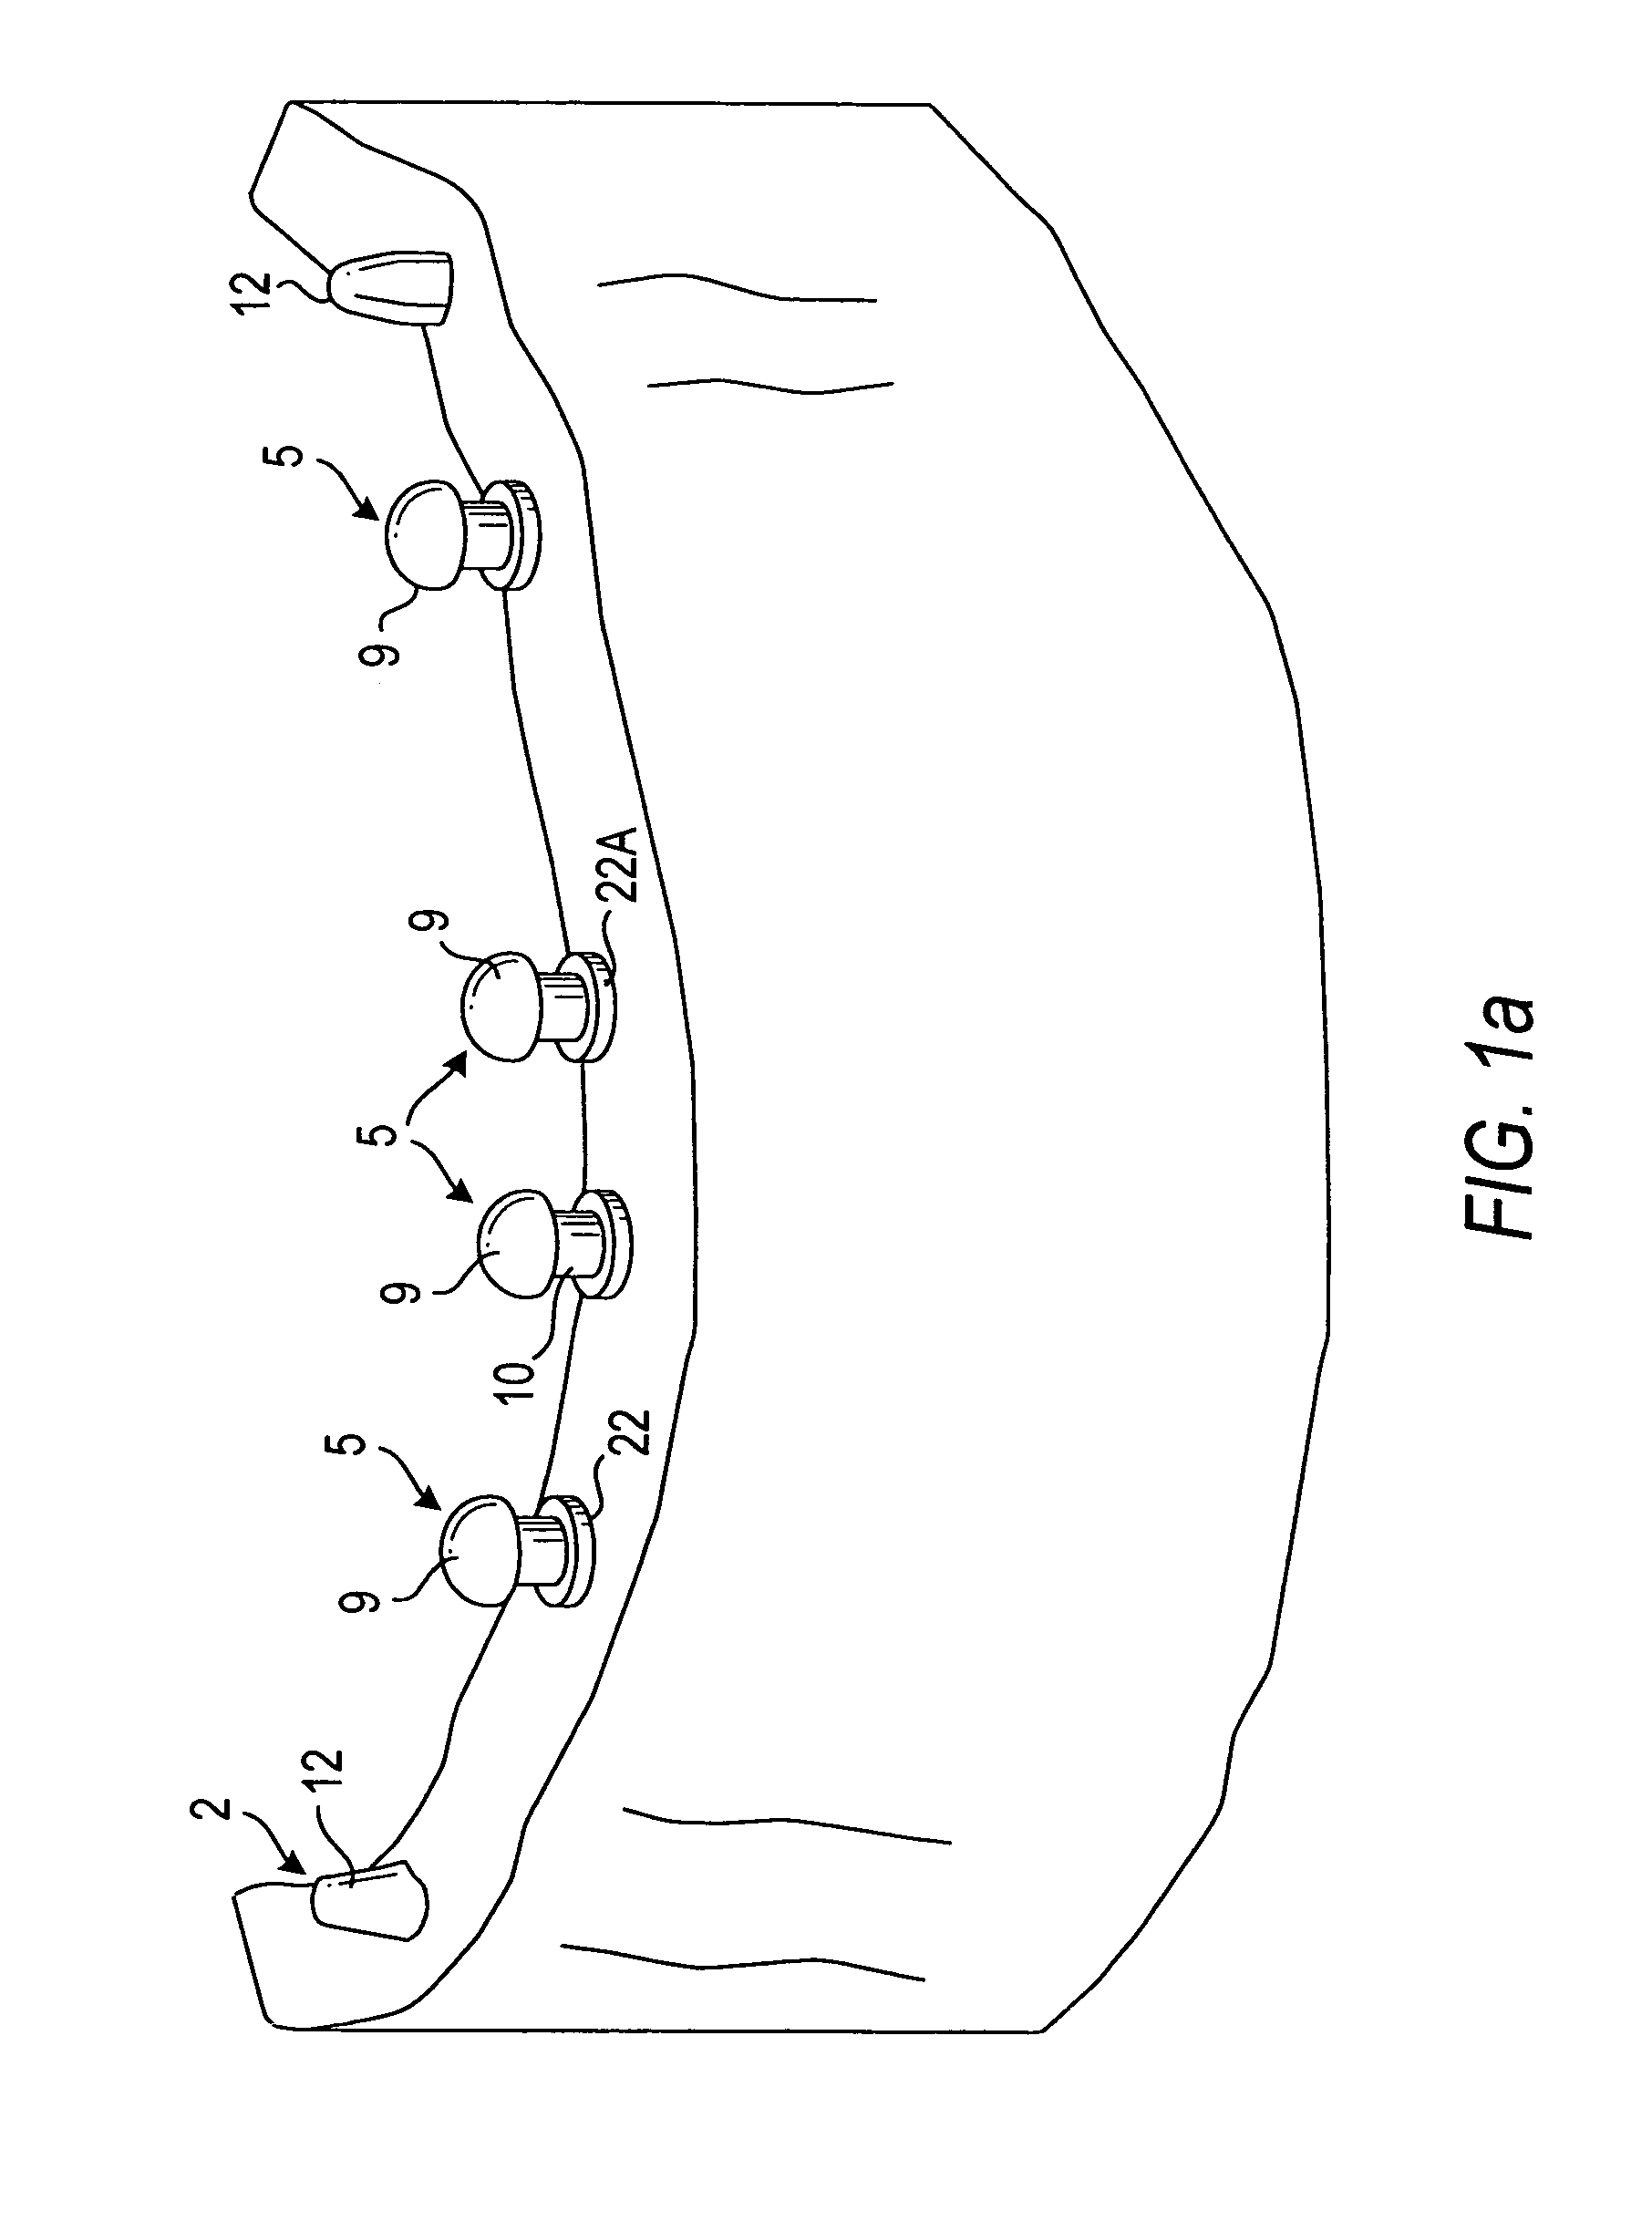 Components for permanent removable and adjustable dentures and bridges